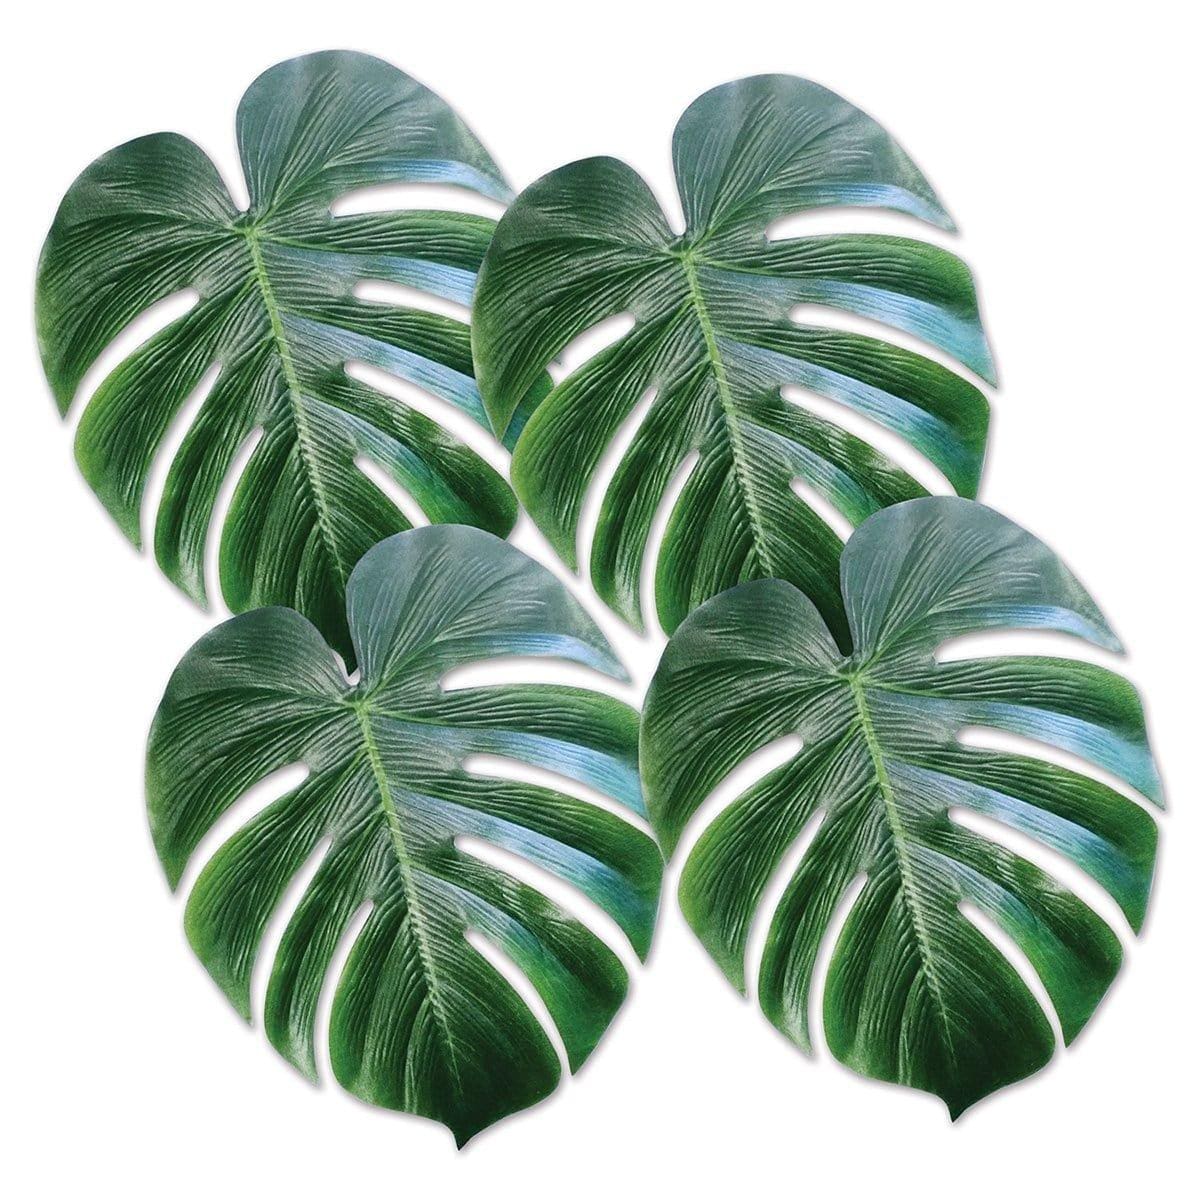 Buy Theme Party Tropical Palm Leaves 13 Inches, 4 per Package sold at Party Expert